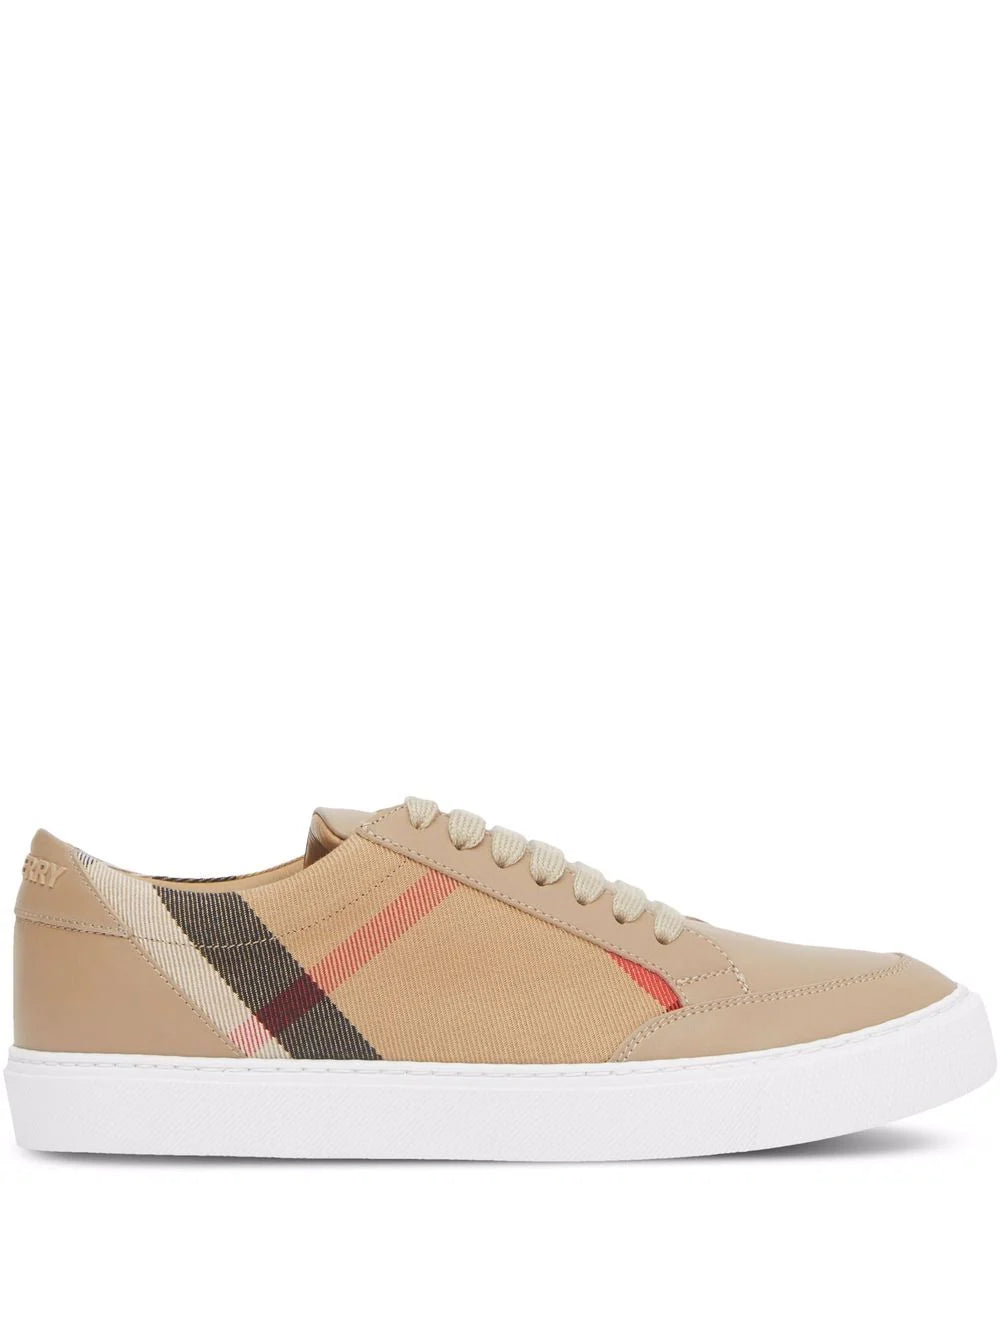 Burberry Beige House Check Sneakers